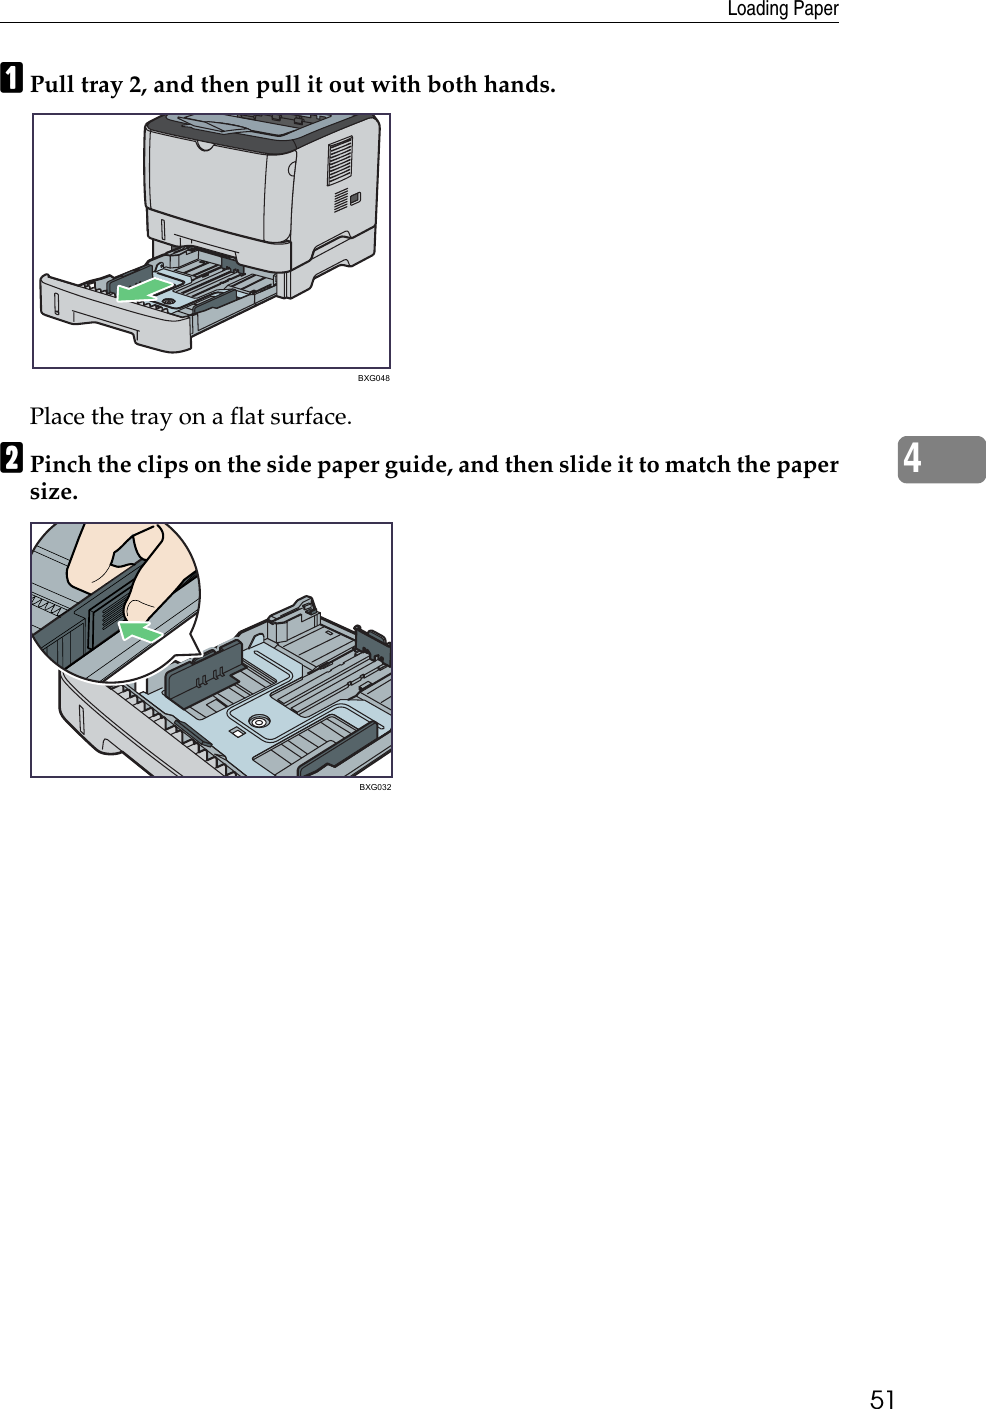 Loading Paper514APull tray 2, and then pull it out with both hands.Place the tray on a flat surface.BPinch the clips on the side paper guide, and then slide it to match the papersize.BXG048BXG032